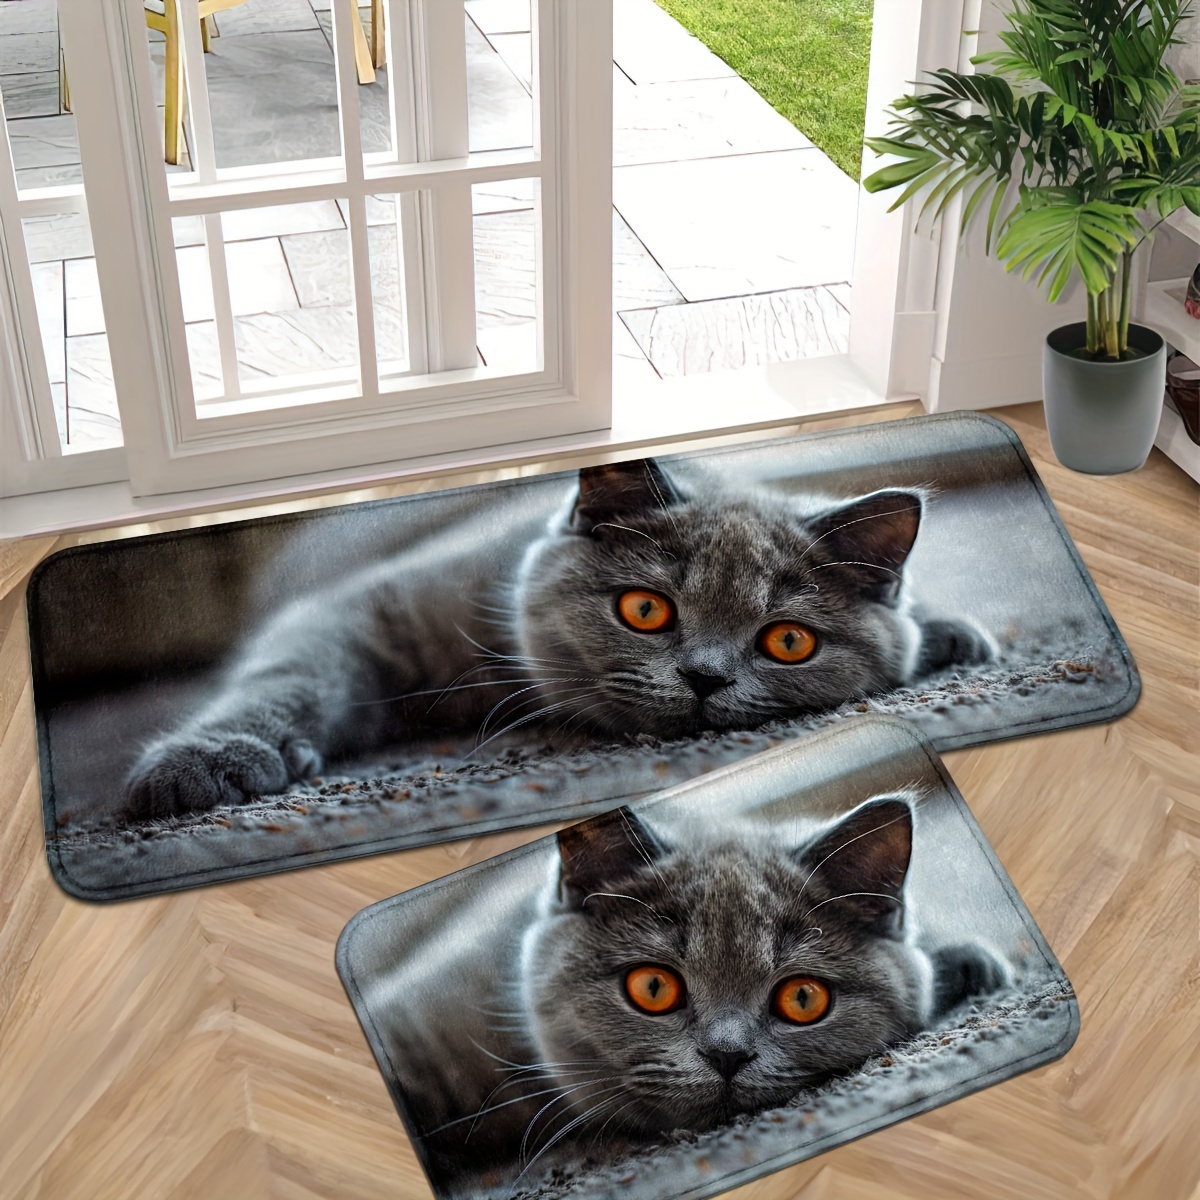 

Adorable British Shorthair Cat Door Mat - Non-slip, Washable Indoor Entrance Rug For Kitchen, Bathroom, Laundry Room - Thick Polyester Runner Carpet